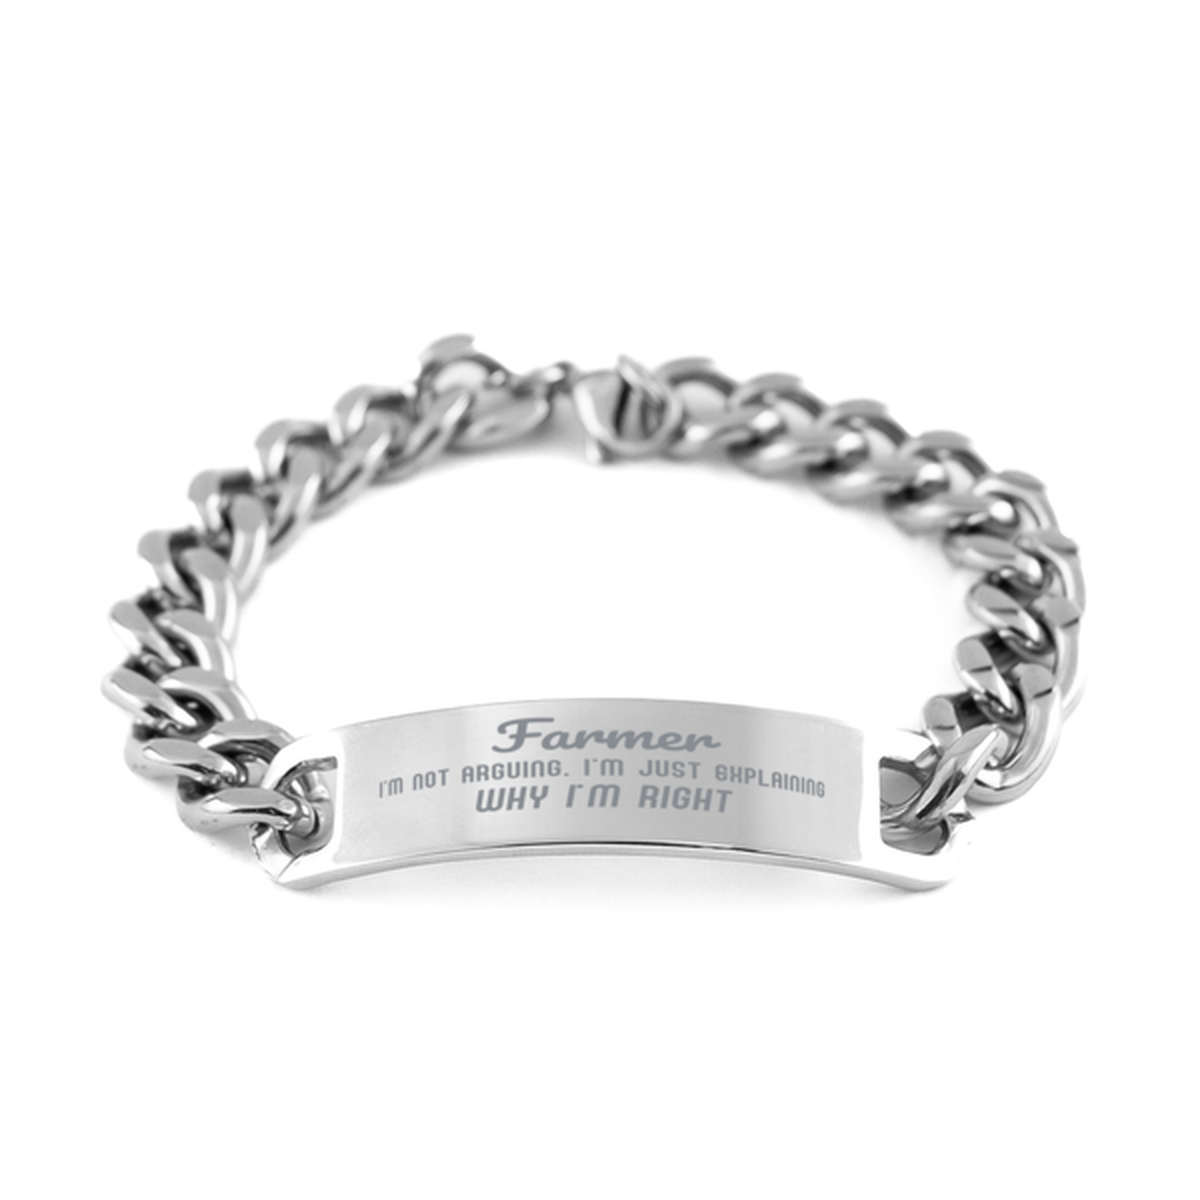 Farmer I'm not Arguing. I'm Just Explaining Why I'm RIGHT Cuban Chain Stainless Steel Bracelet, Graduation Birthday Christmas Farmer Gifts For Farmer Funny Saying Quote Present for Men Women Coworker